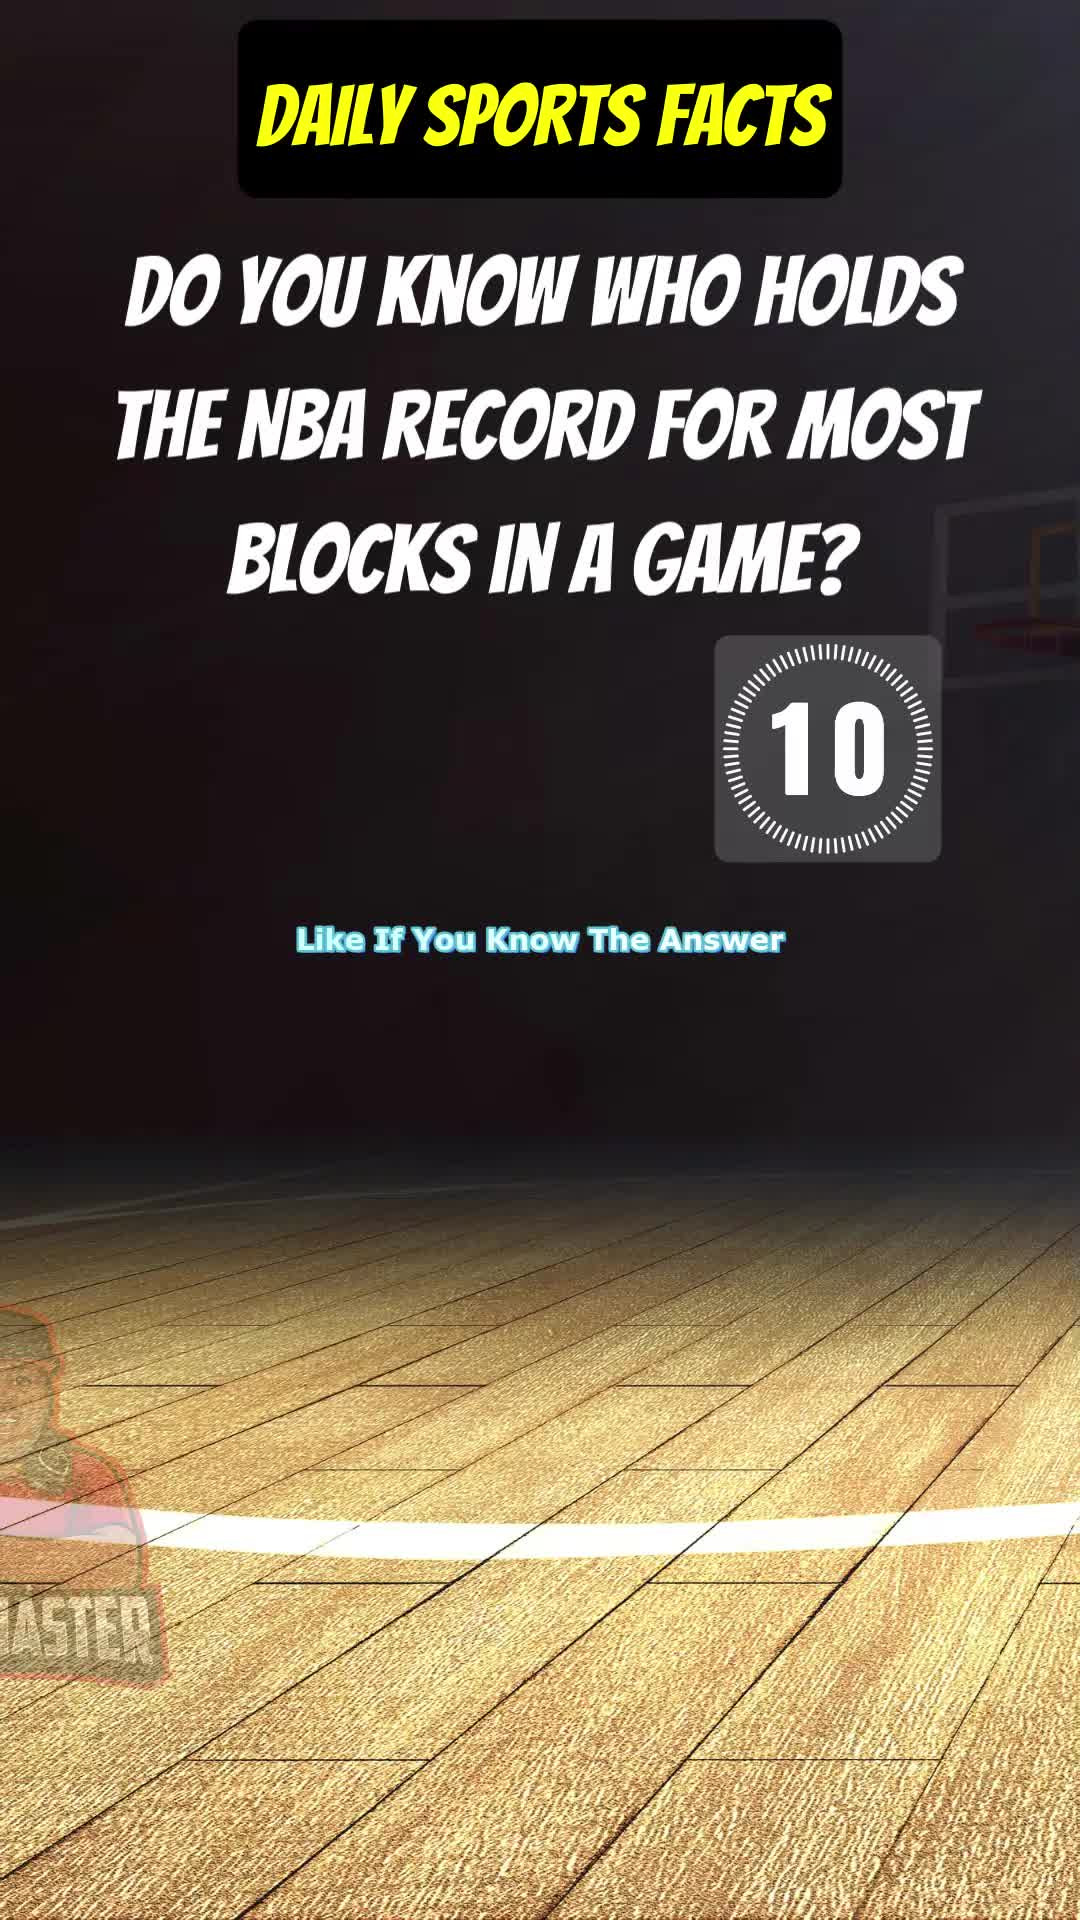 Do You Know .... Daily Sports Facts - NBA 7/5 #nba #trivia #sports #facts